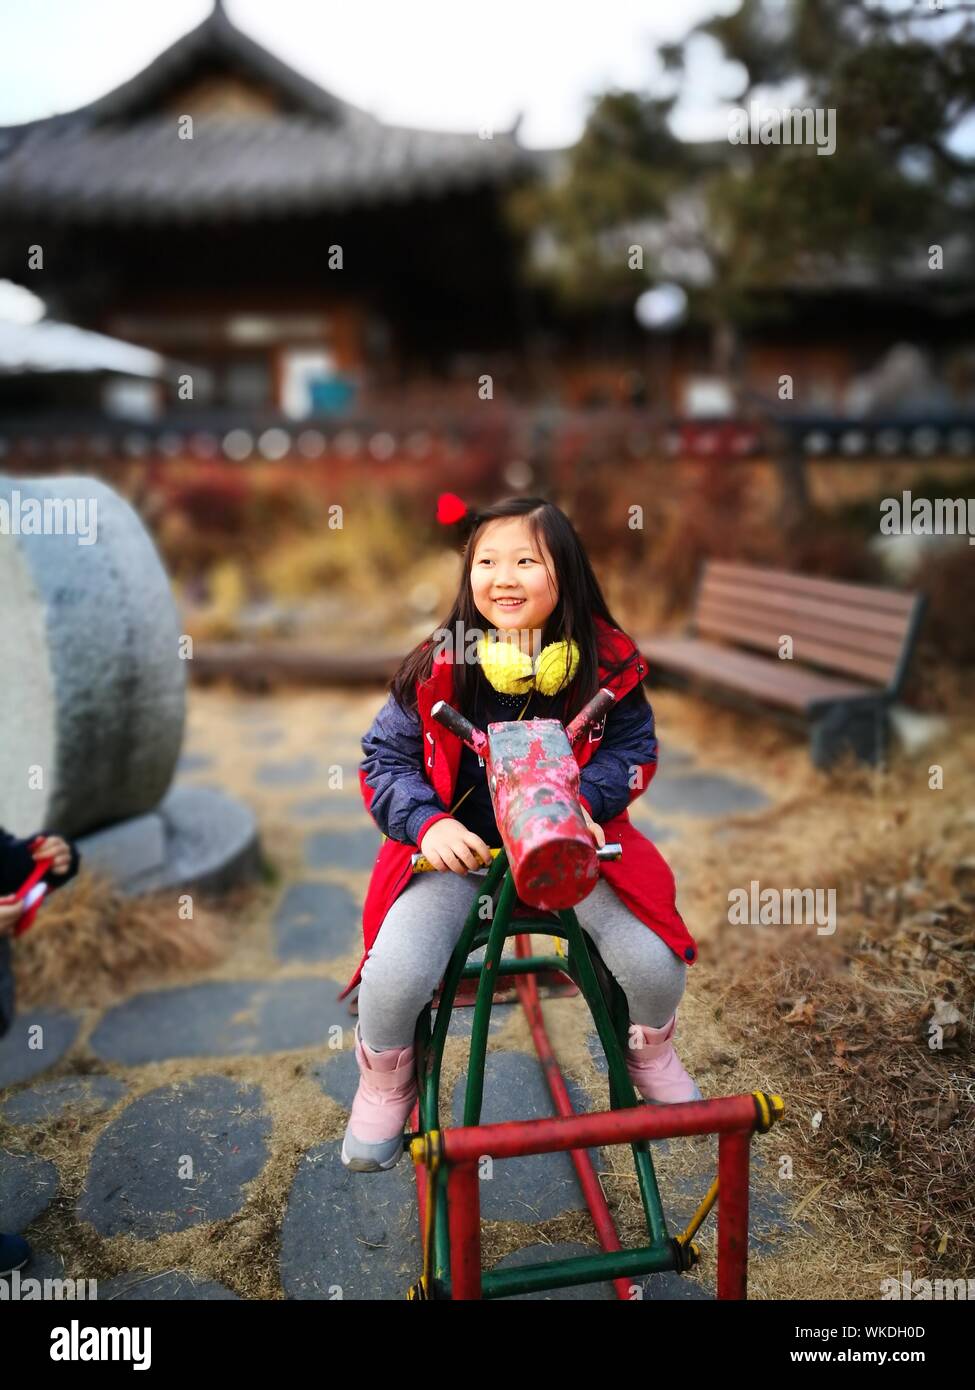 Happy Girl Playing On Outdoor Play Equipment Stock Photo